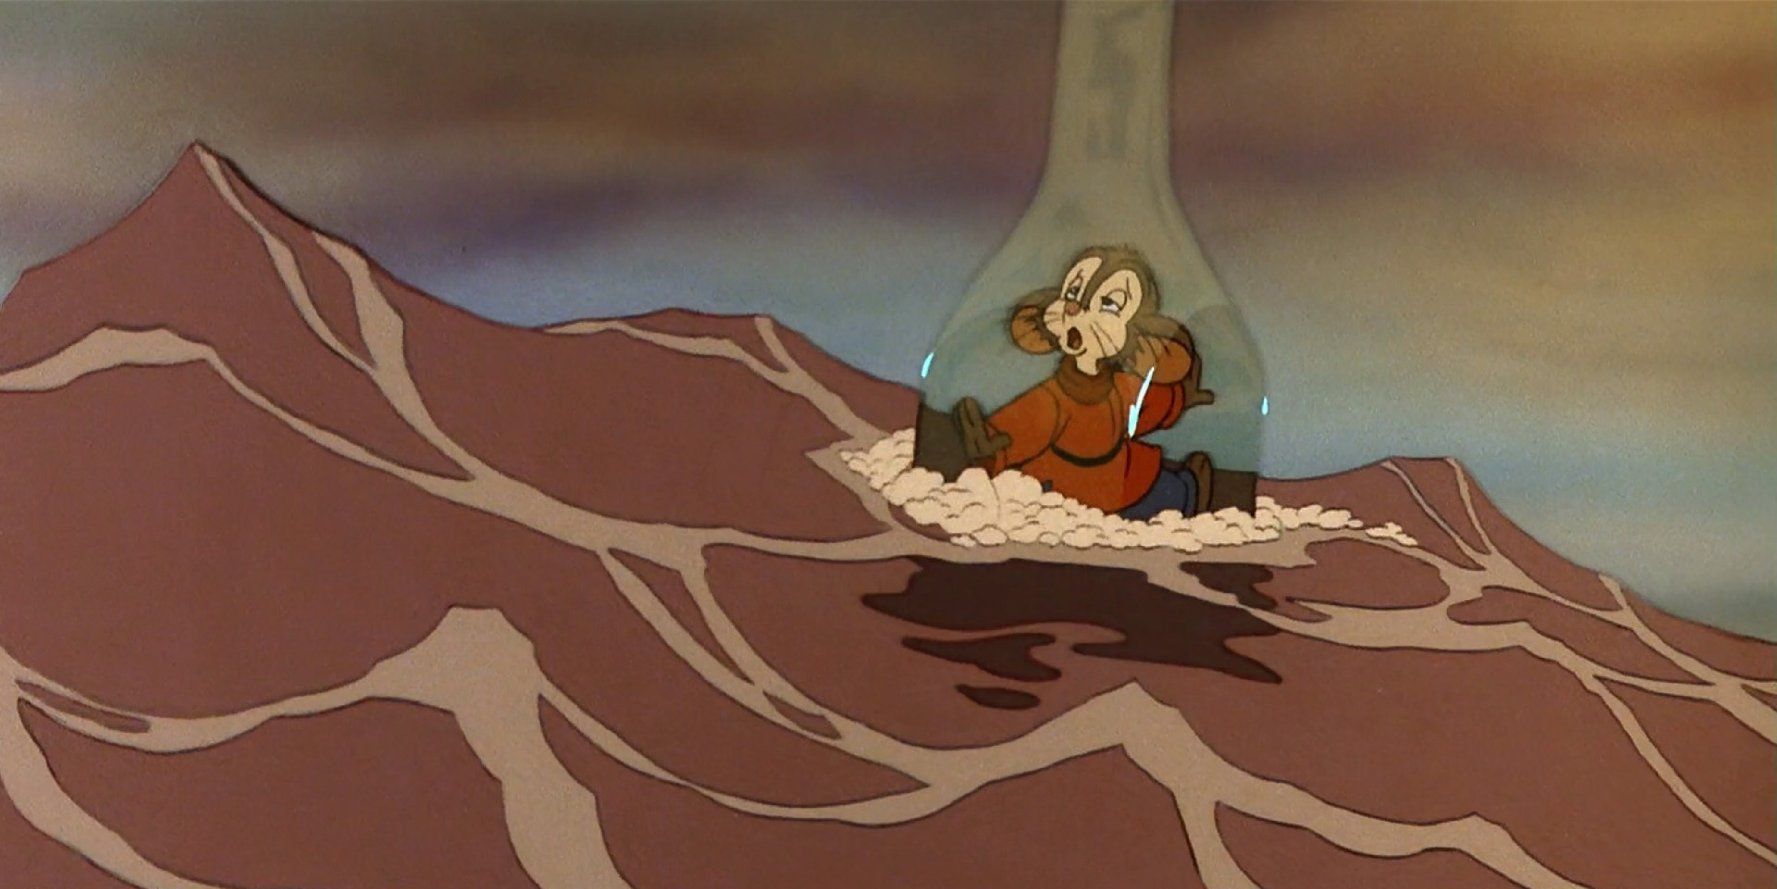 Fivel trapped in a glass bottle in An American Tail.